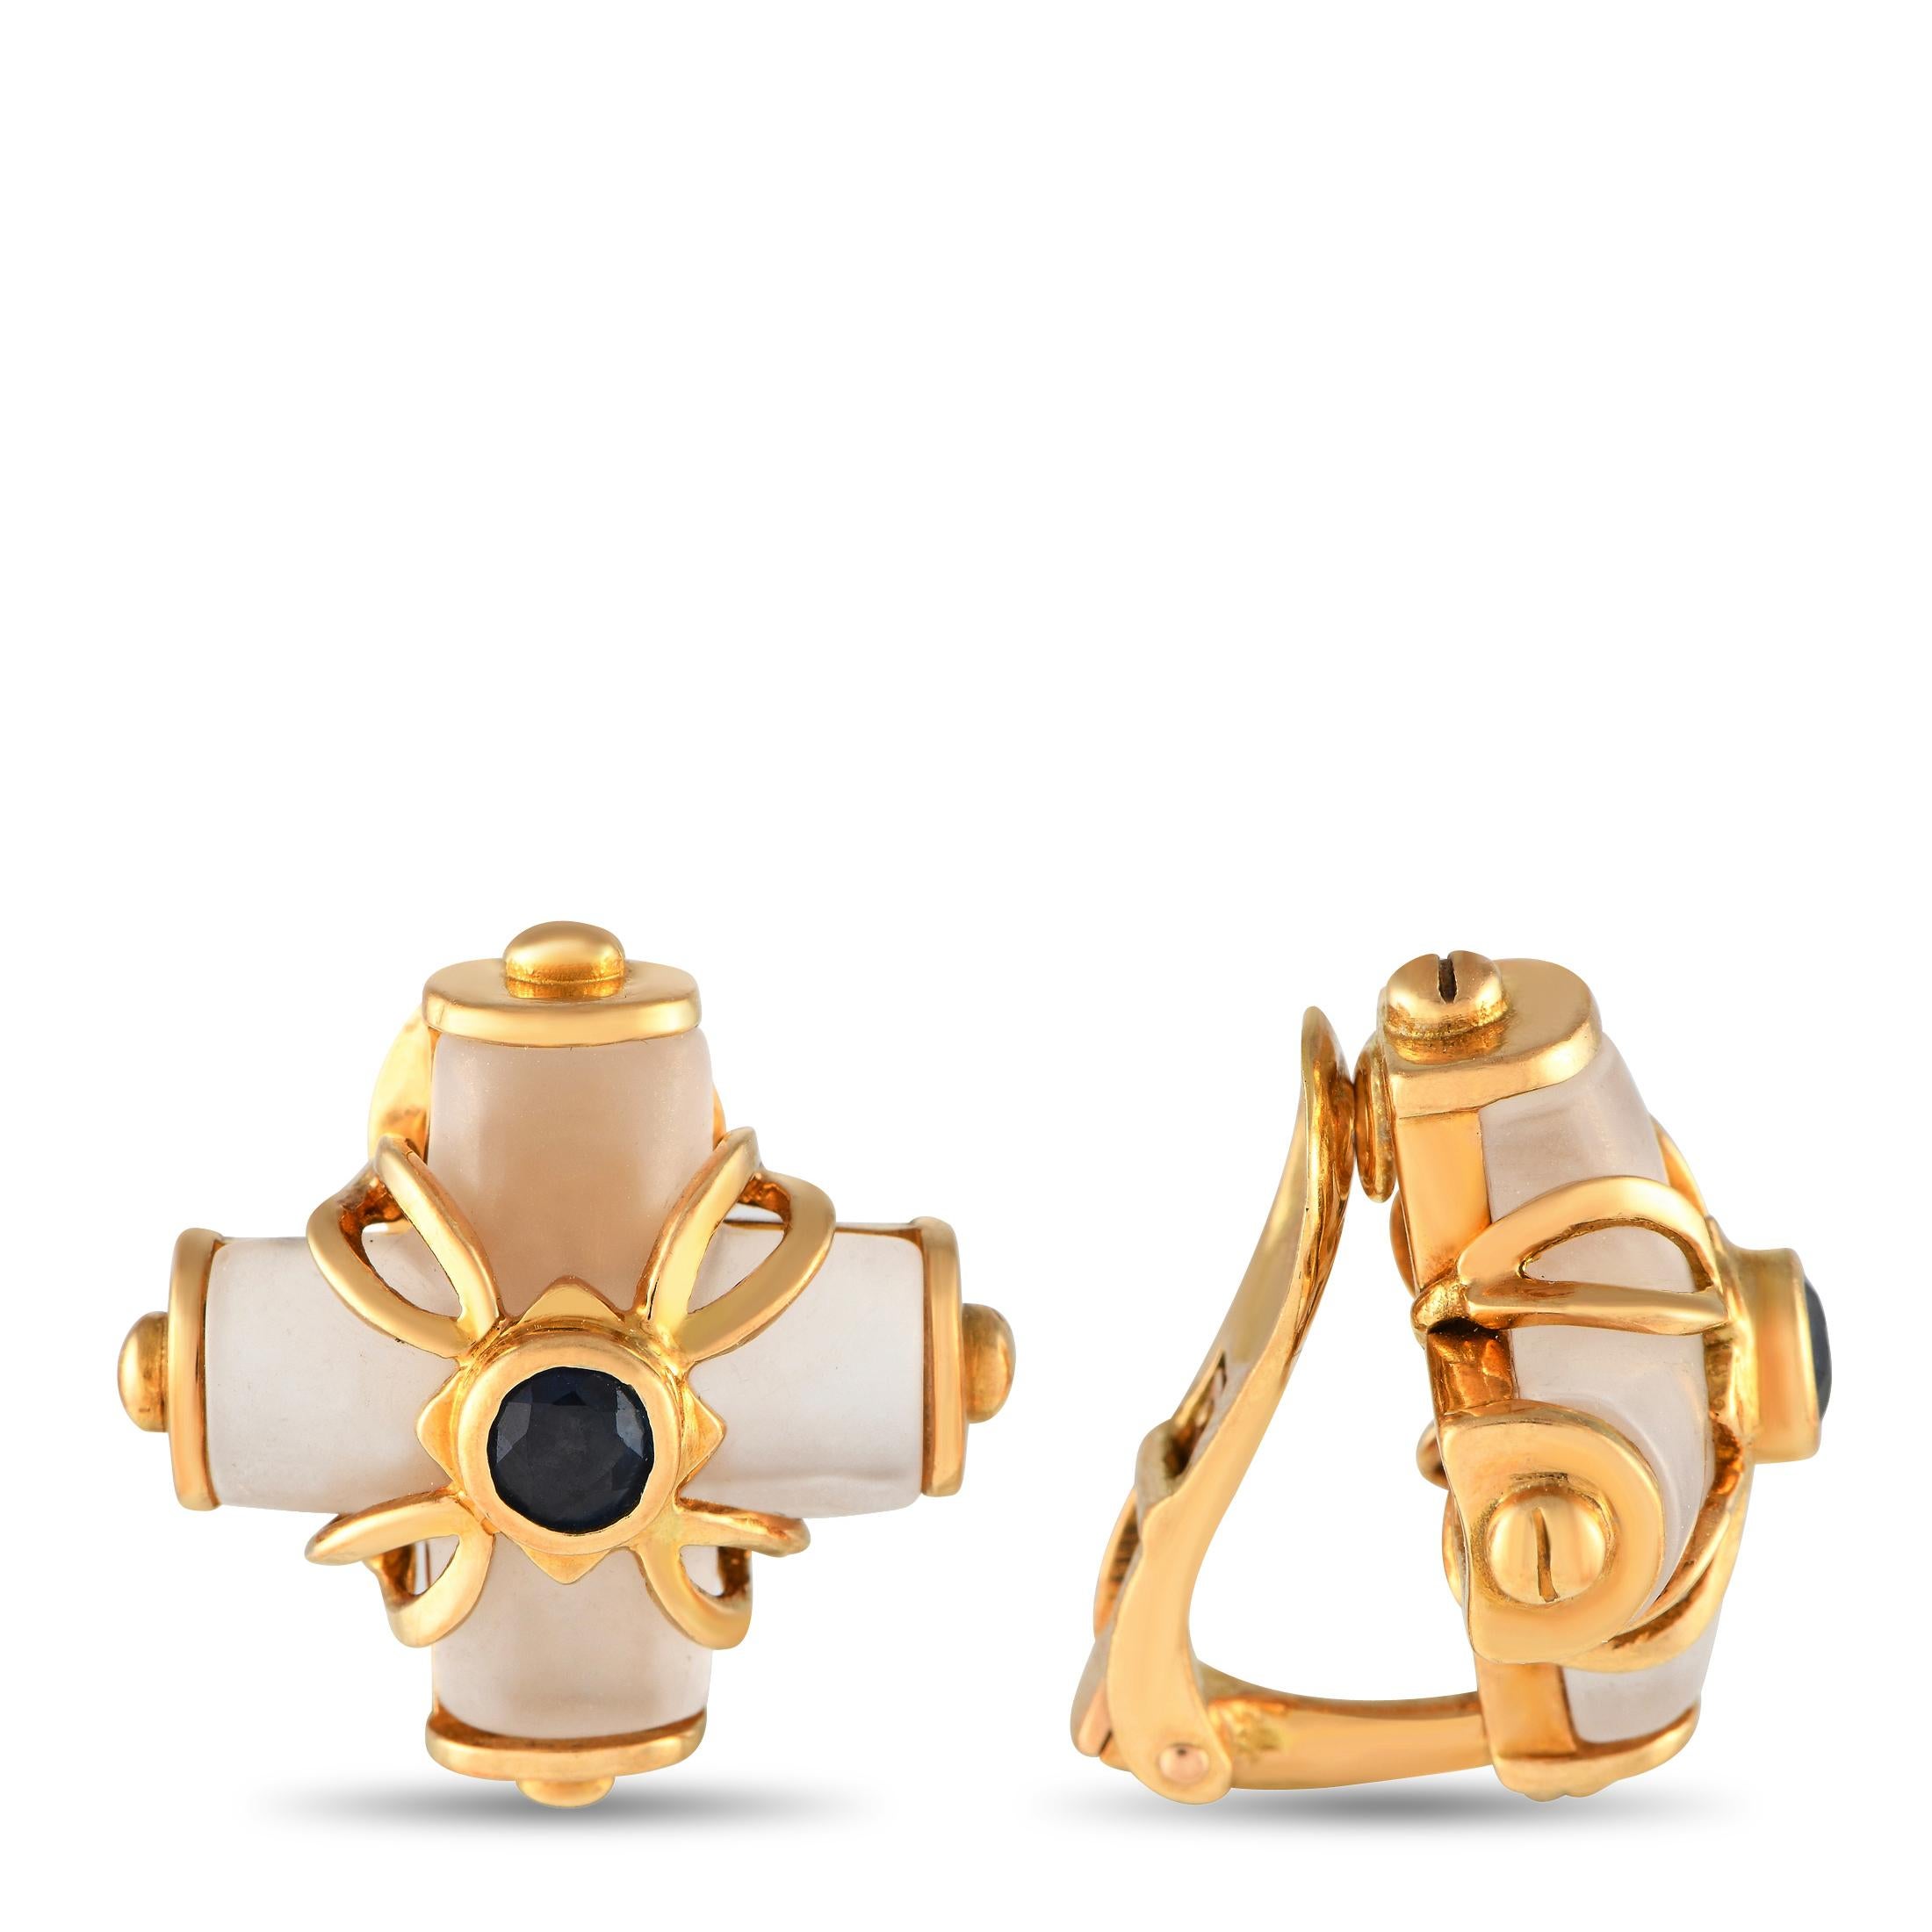 These Ilias Lalaounis earrings are simple, stylish, and statement making. Each one features an elegant 18K Yellow Gold setting that measures 0.75 round and is accented by sparkling Crystal and Sapphire accents.This jewelry piece is offered in estate